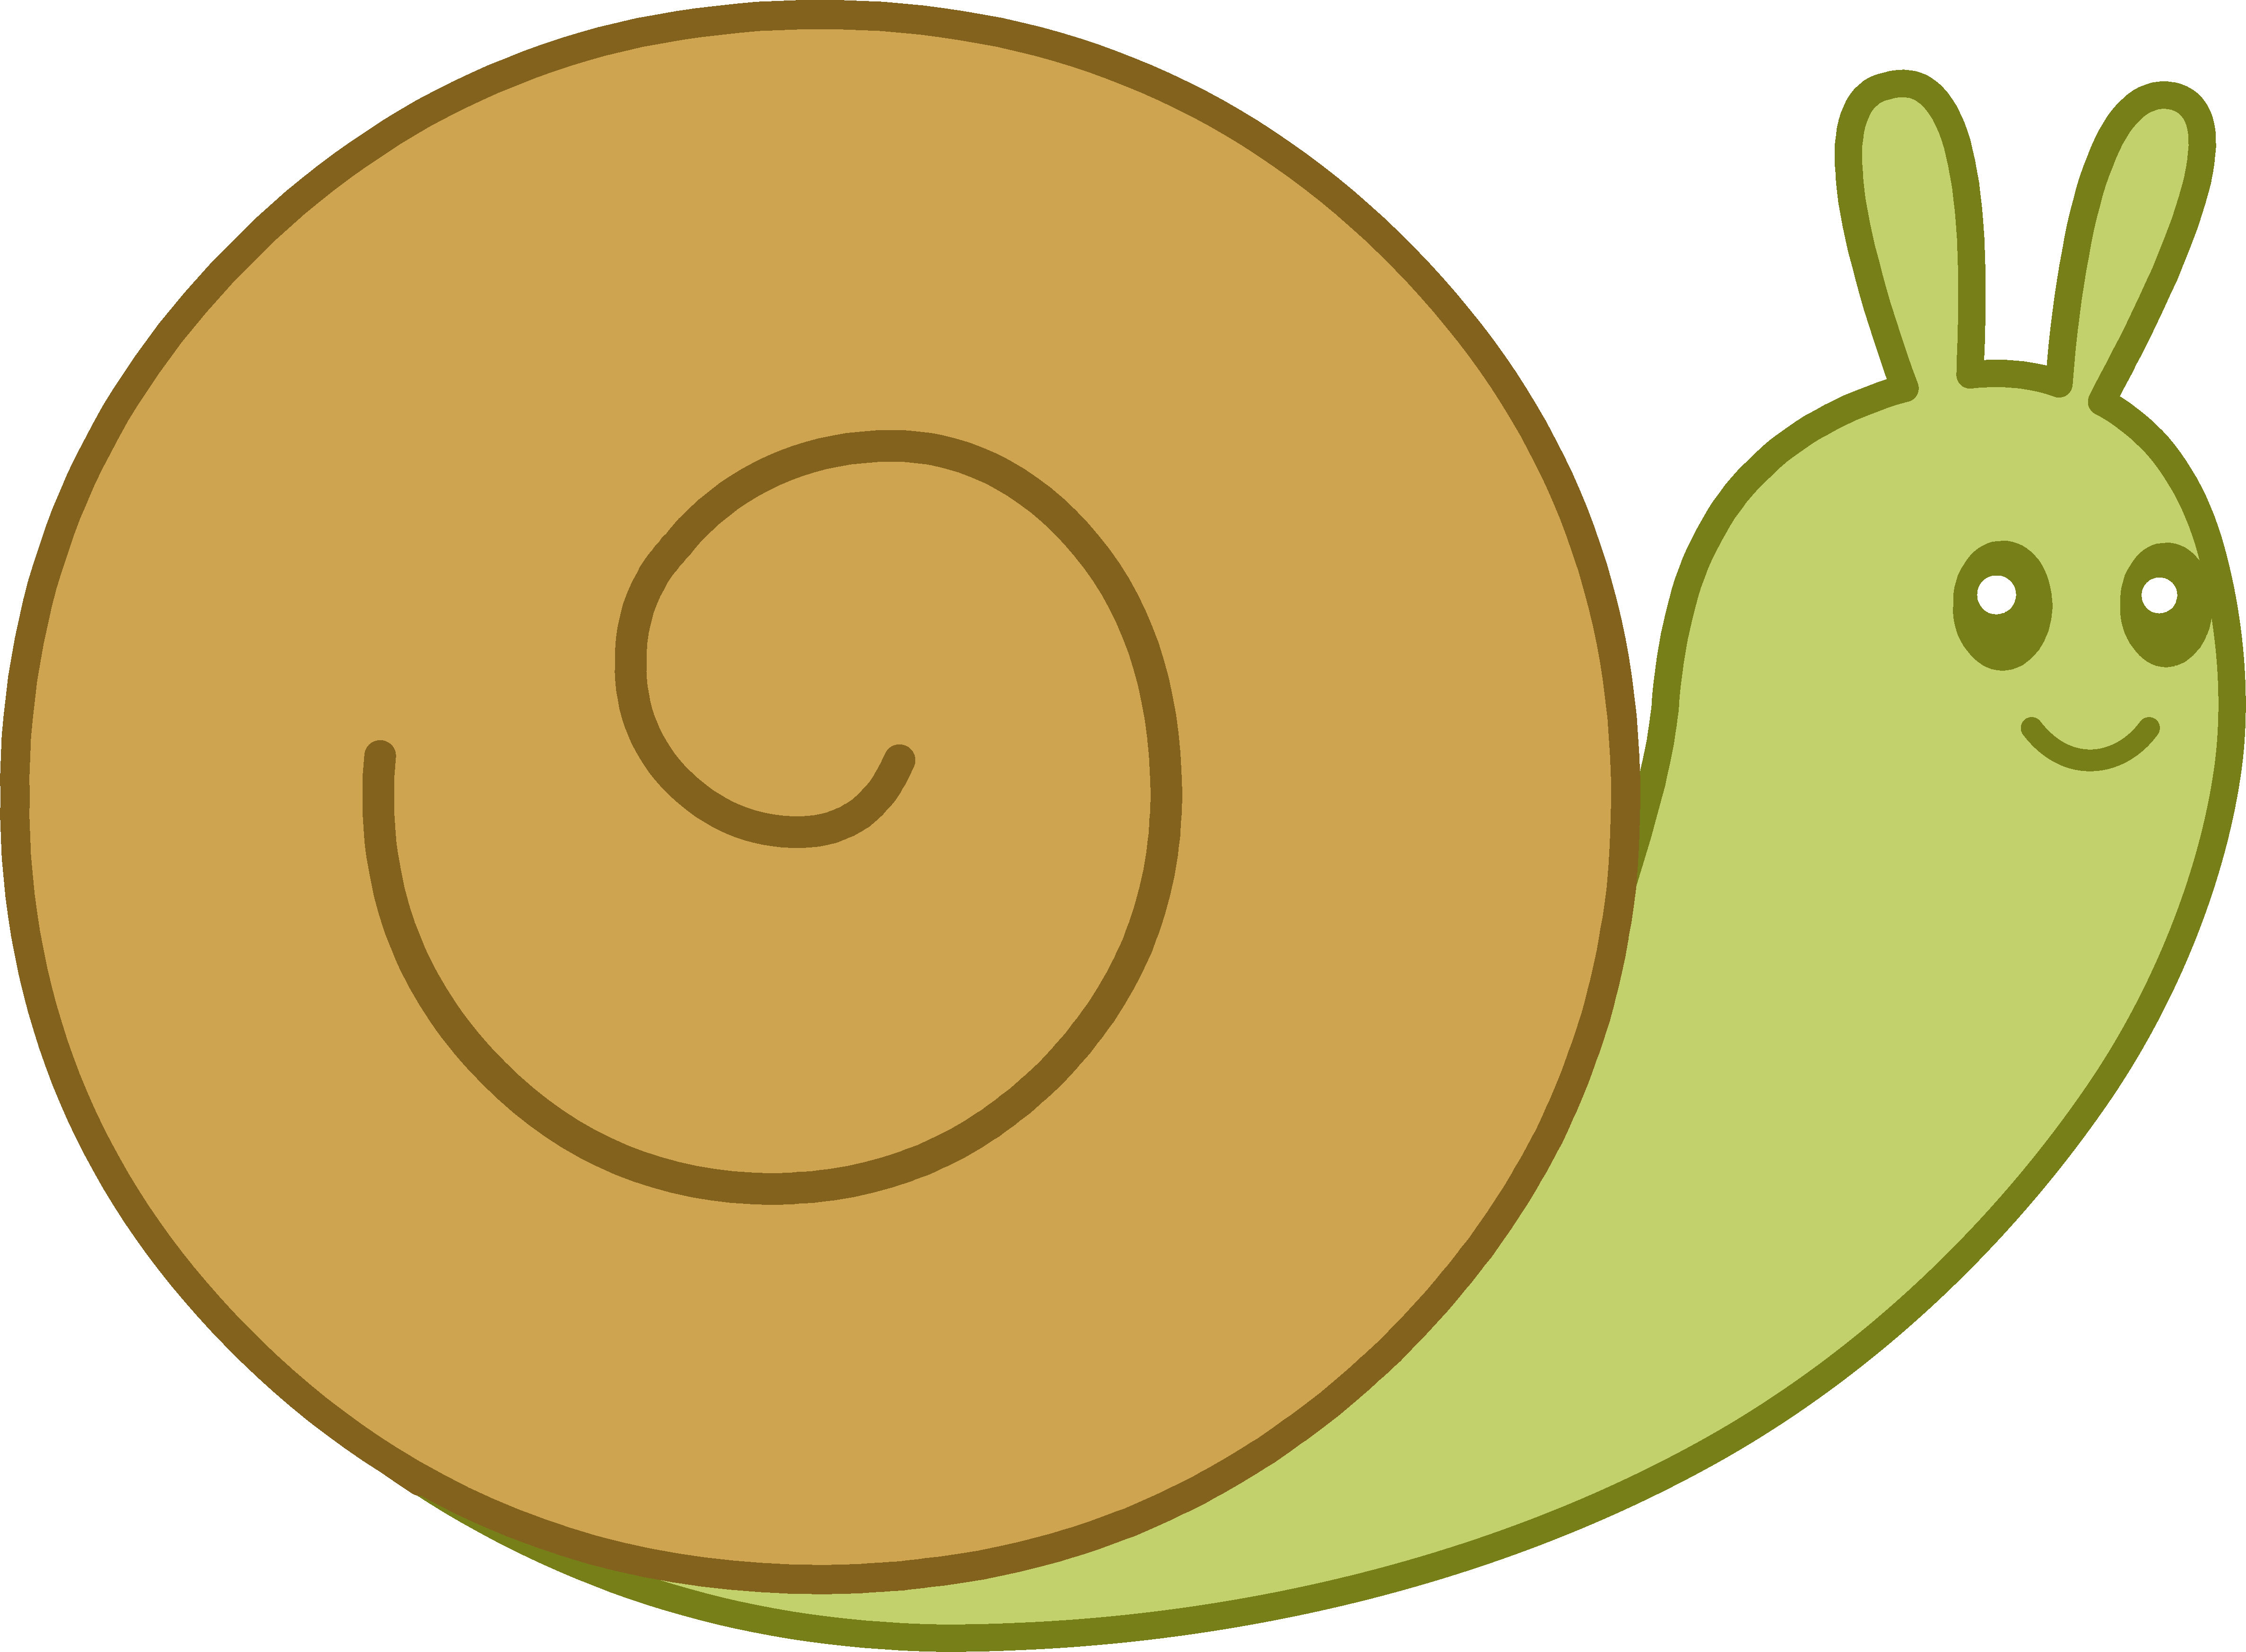 Cute Brown and Green Snail.